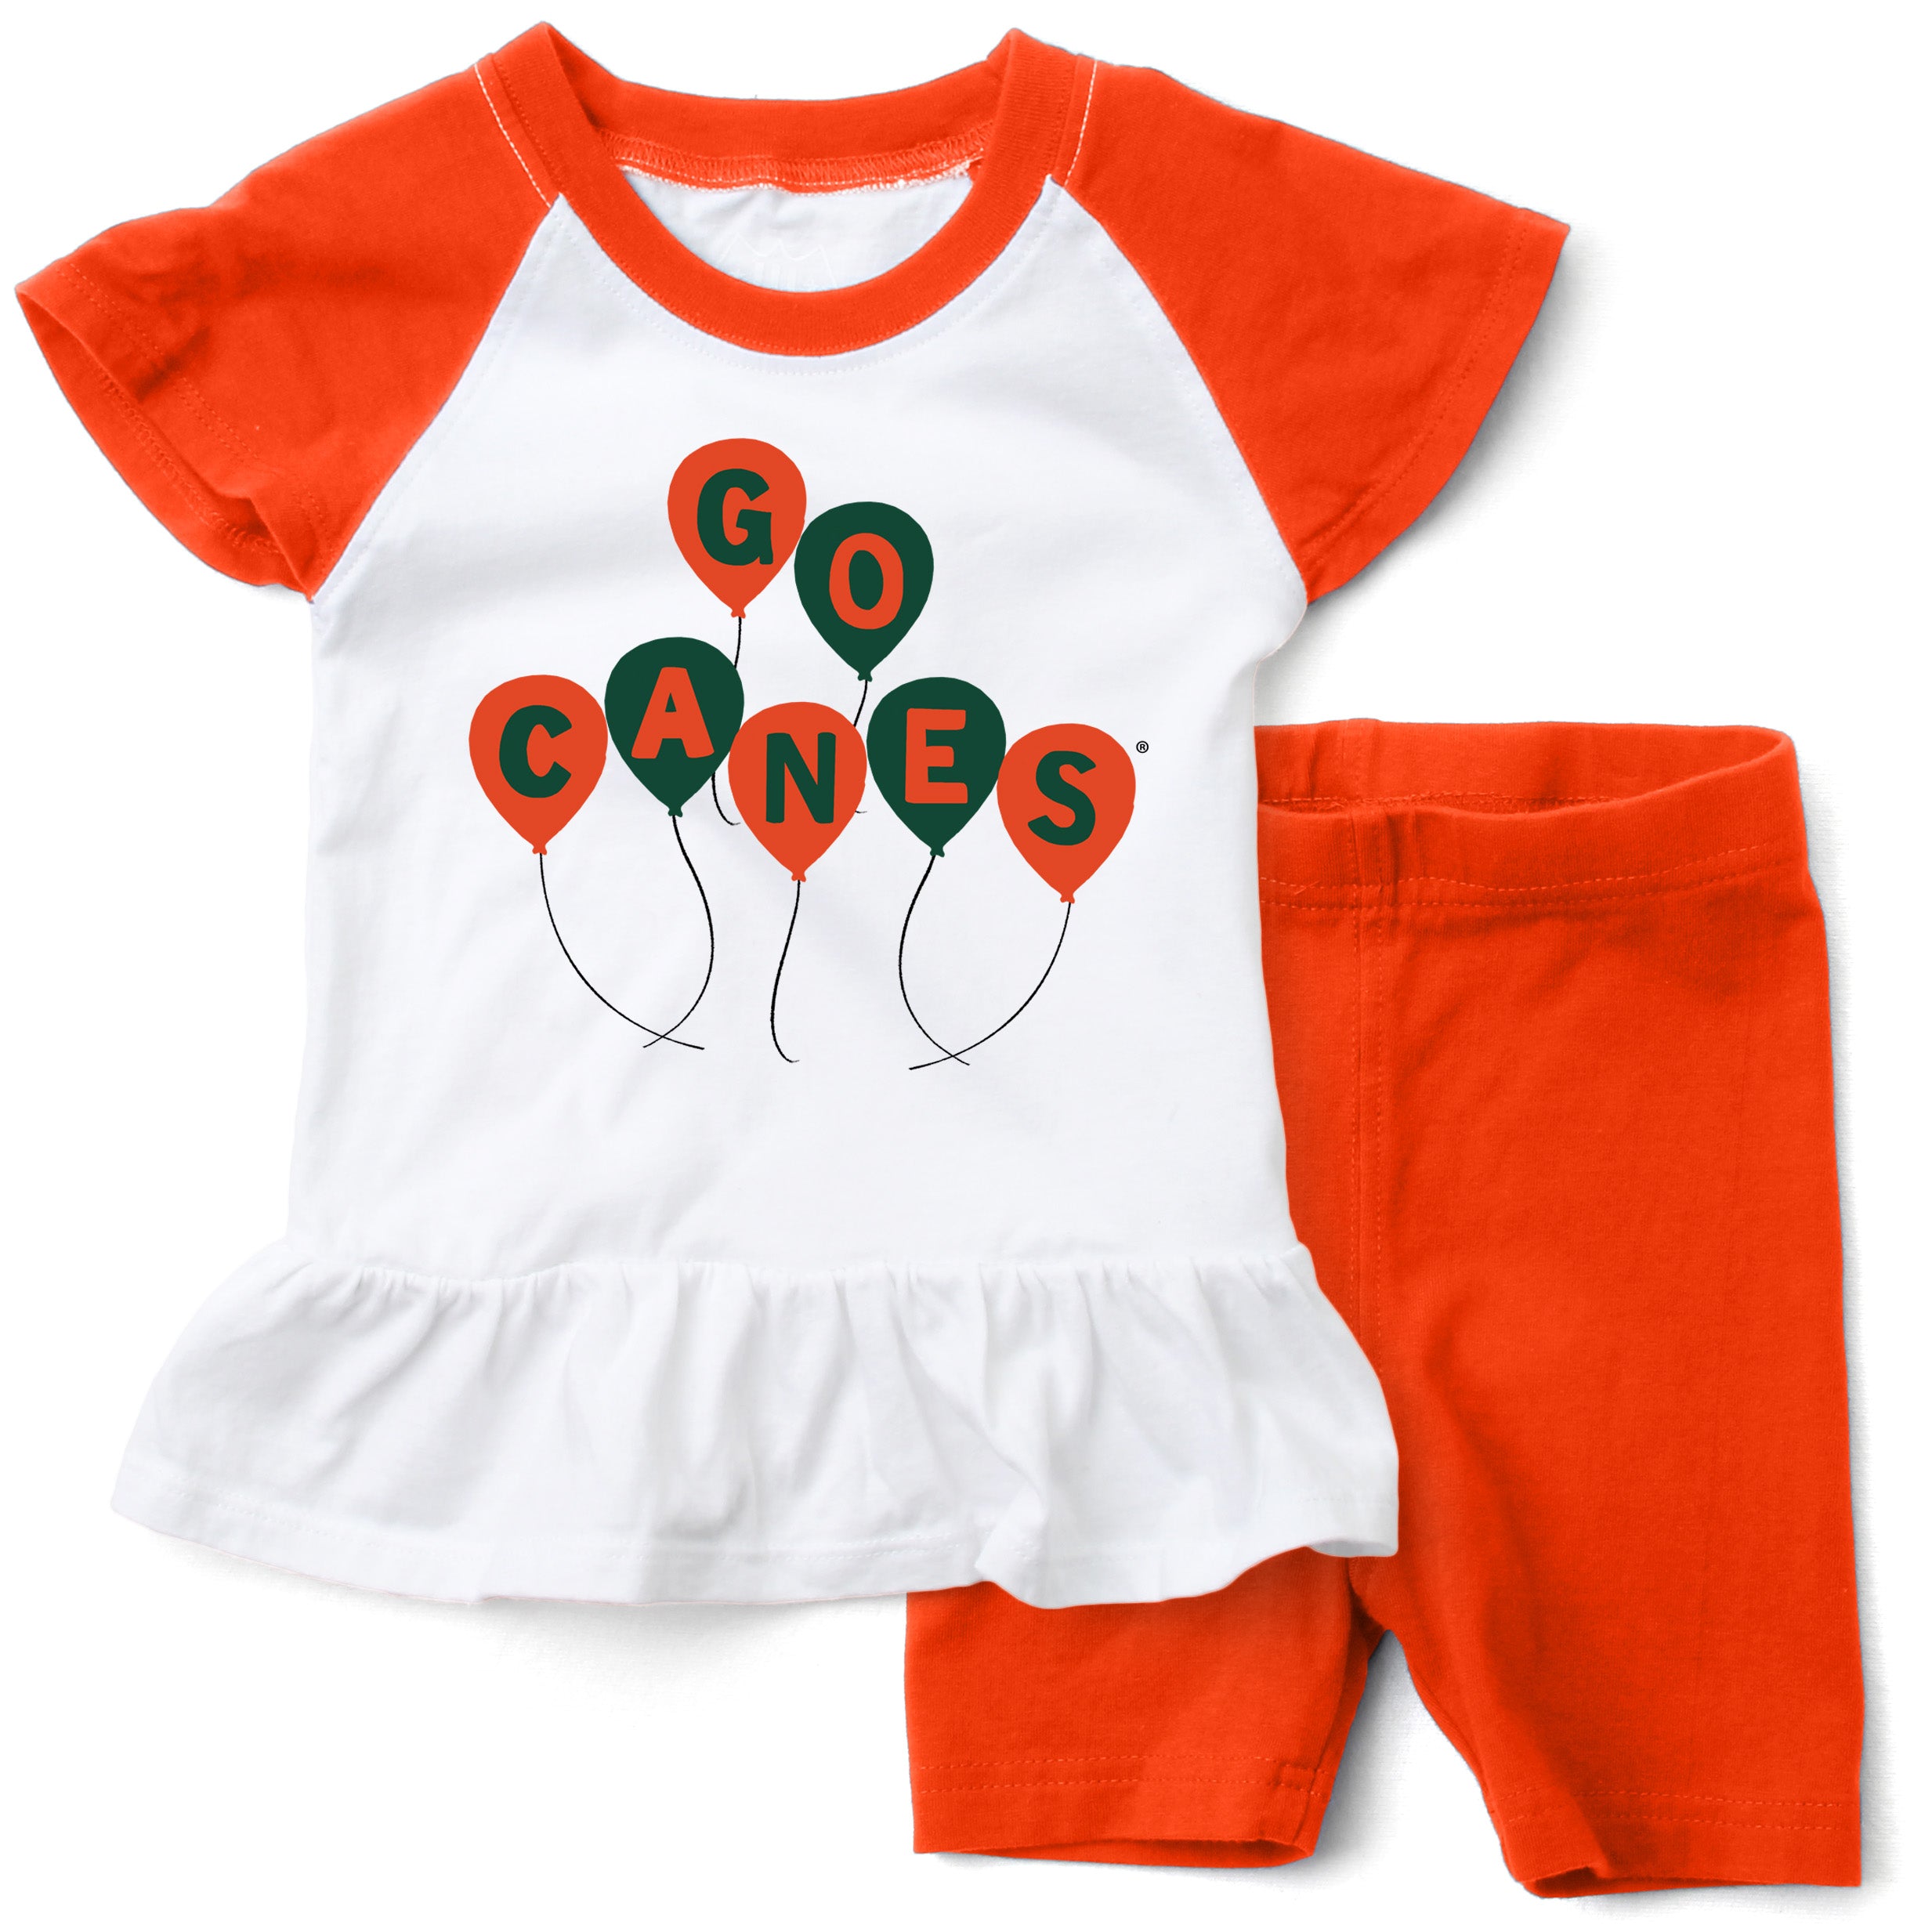 Miami Hurricanes Wes and Willy Infant & Toddler Flutter Sleeve Short Set - Orange Crush